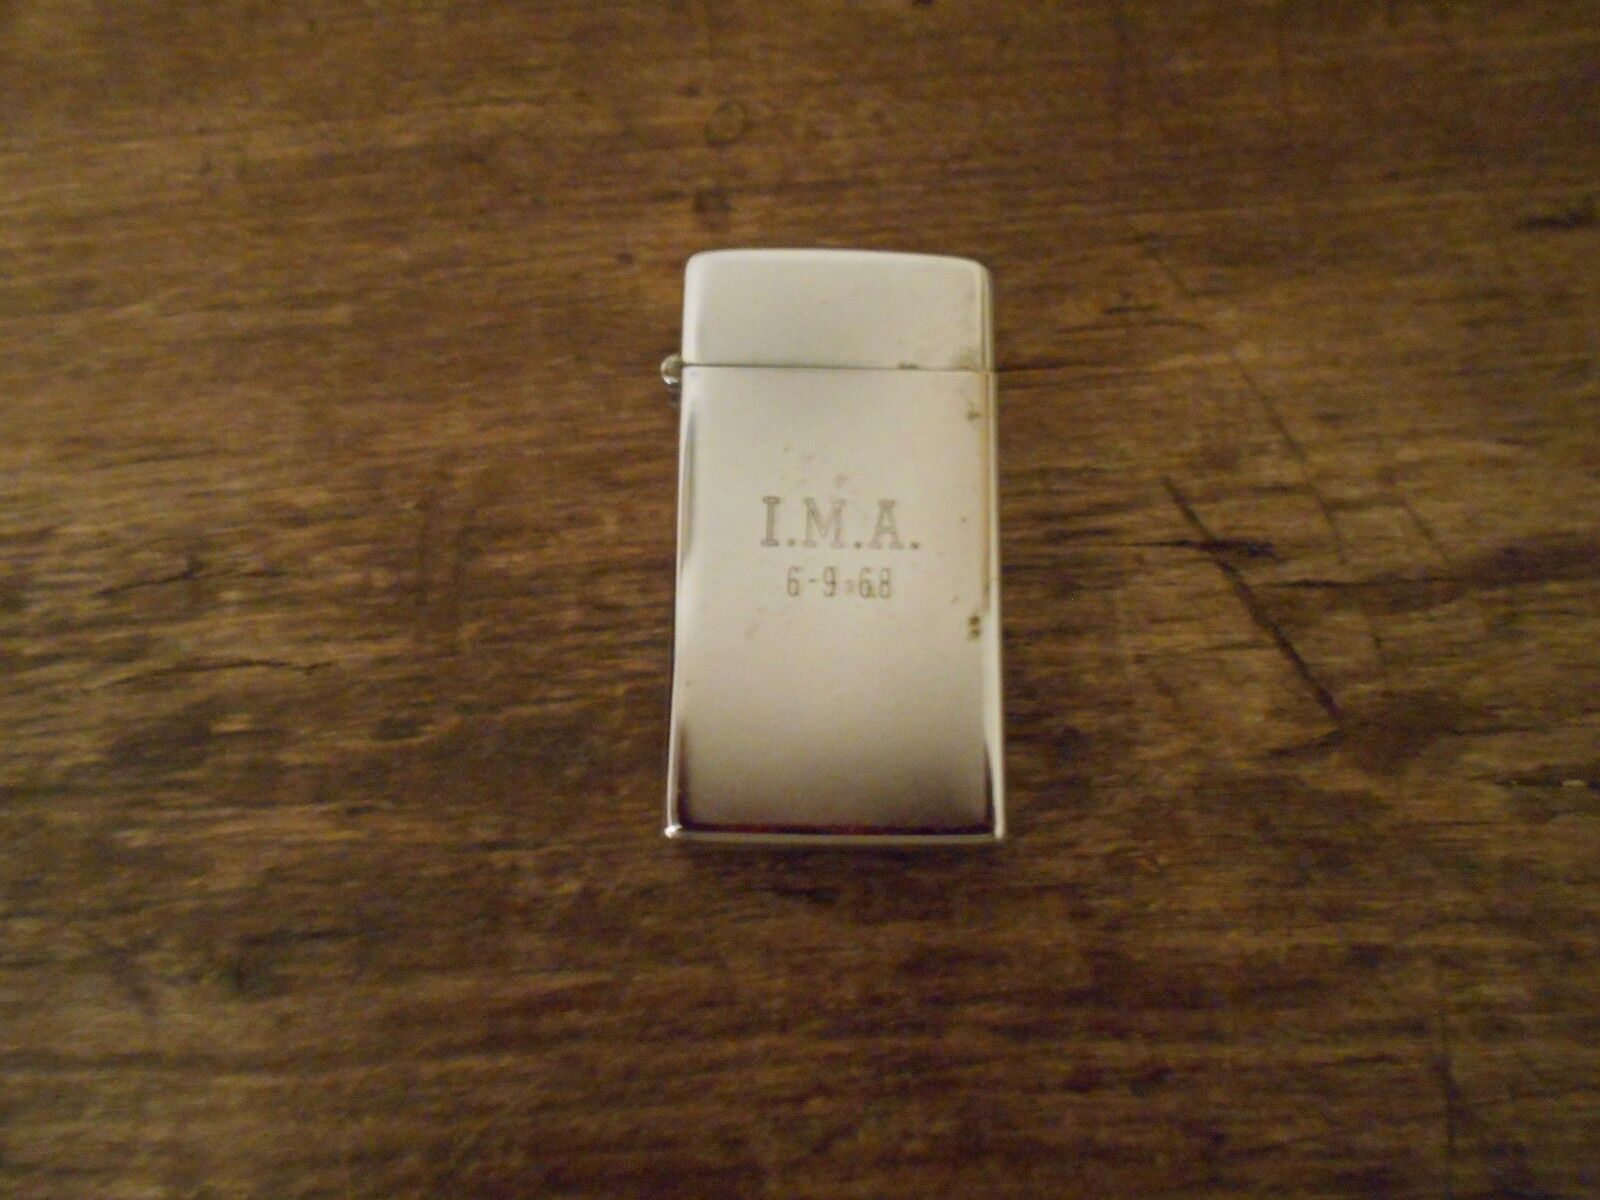 VINTAGE 1968 SCRIPTO LIGHTER WITH INITIALS I.M.A.